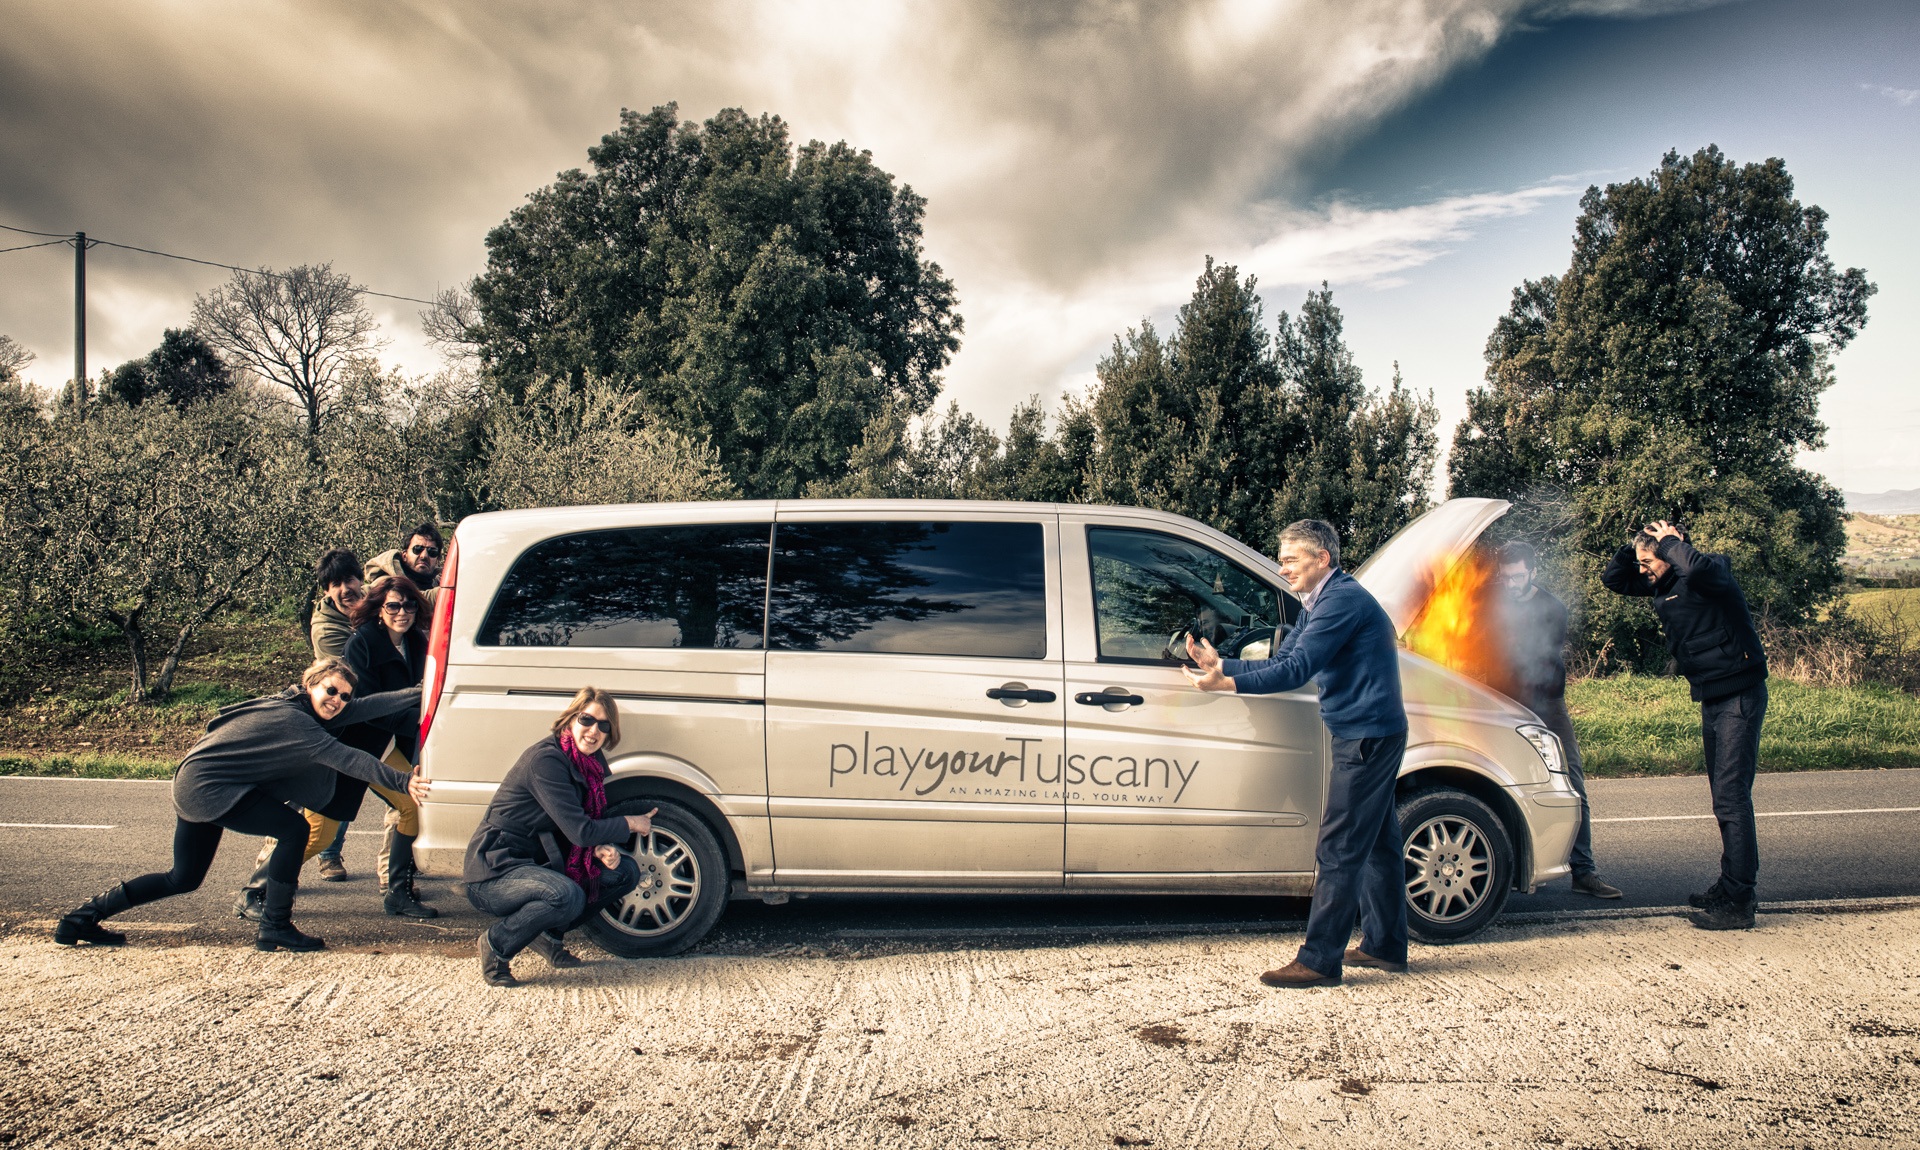 Play Your Tuscany van (with special effects)